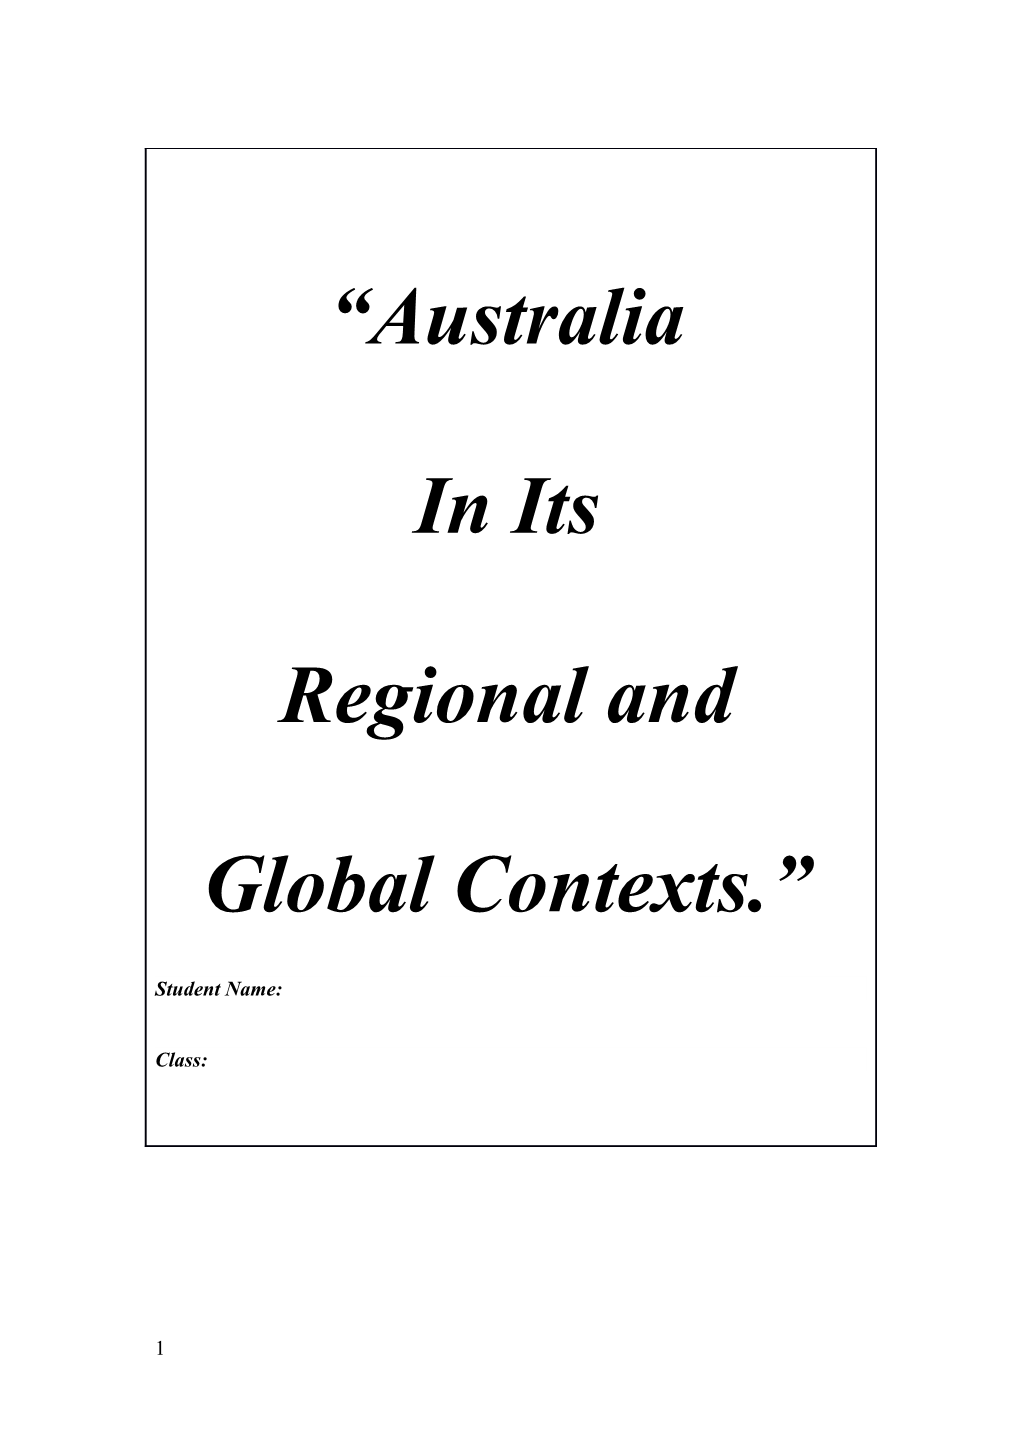 Australia in Its Regional and Global Context